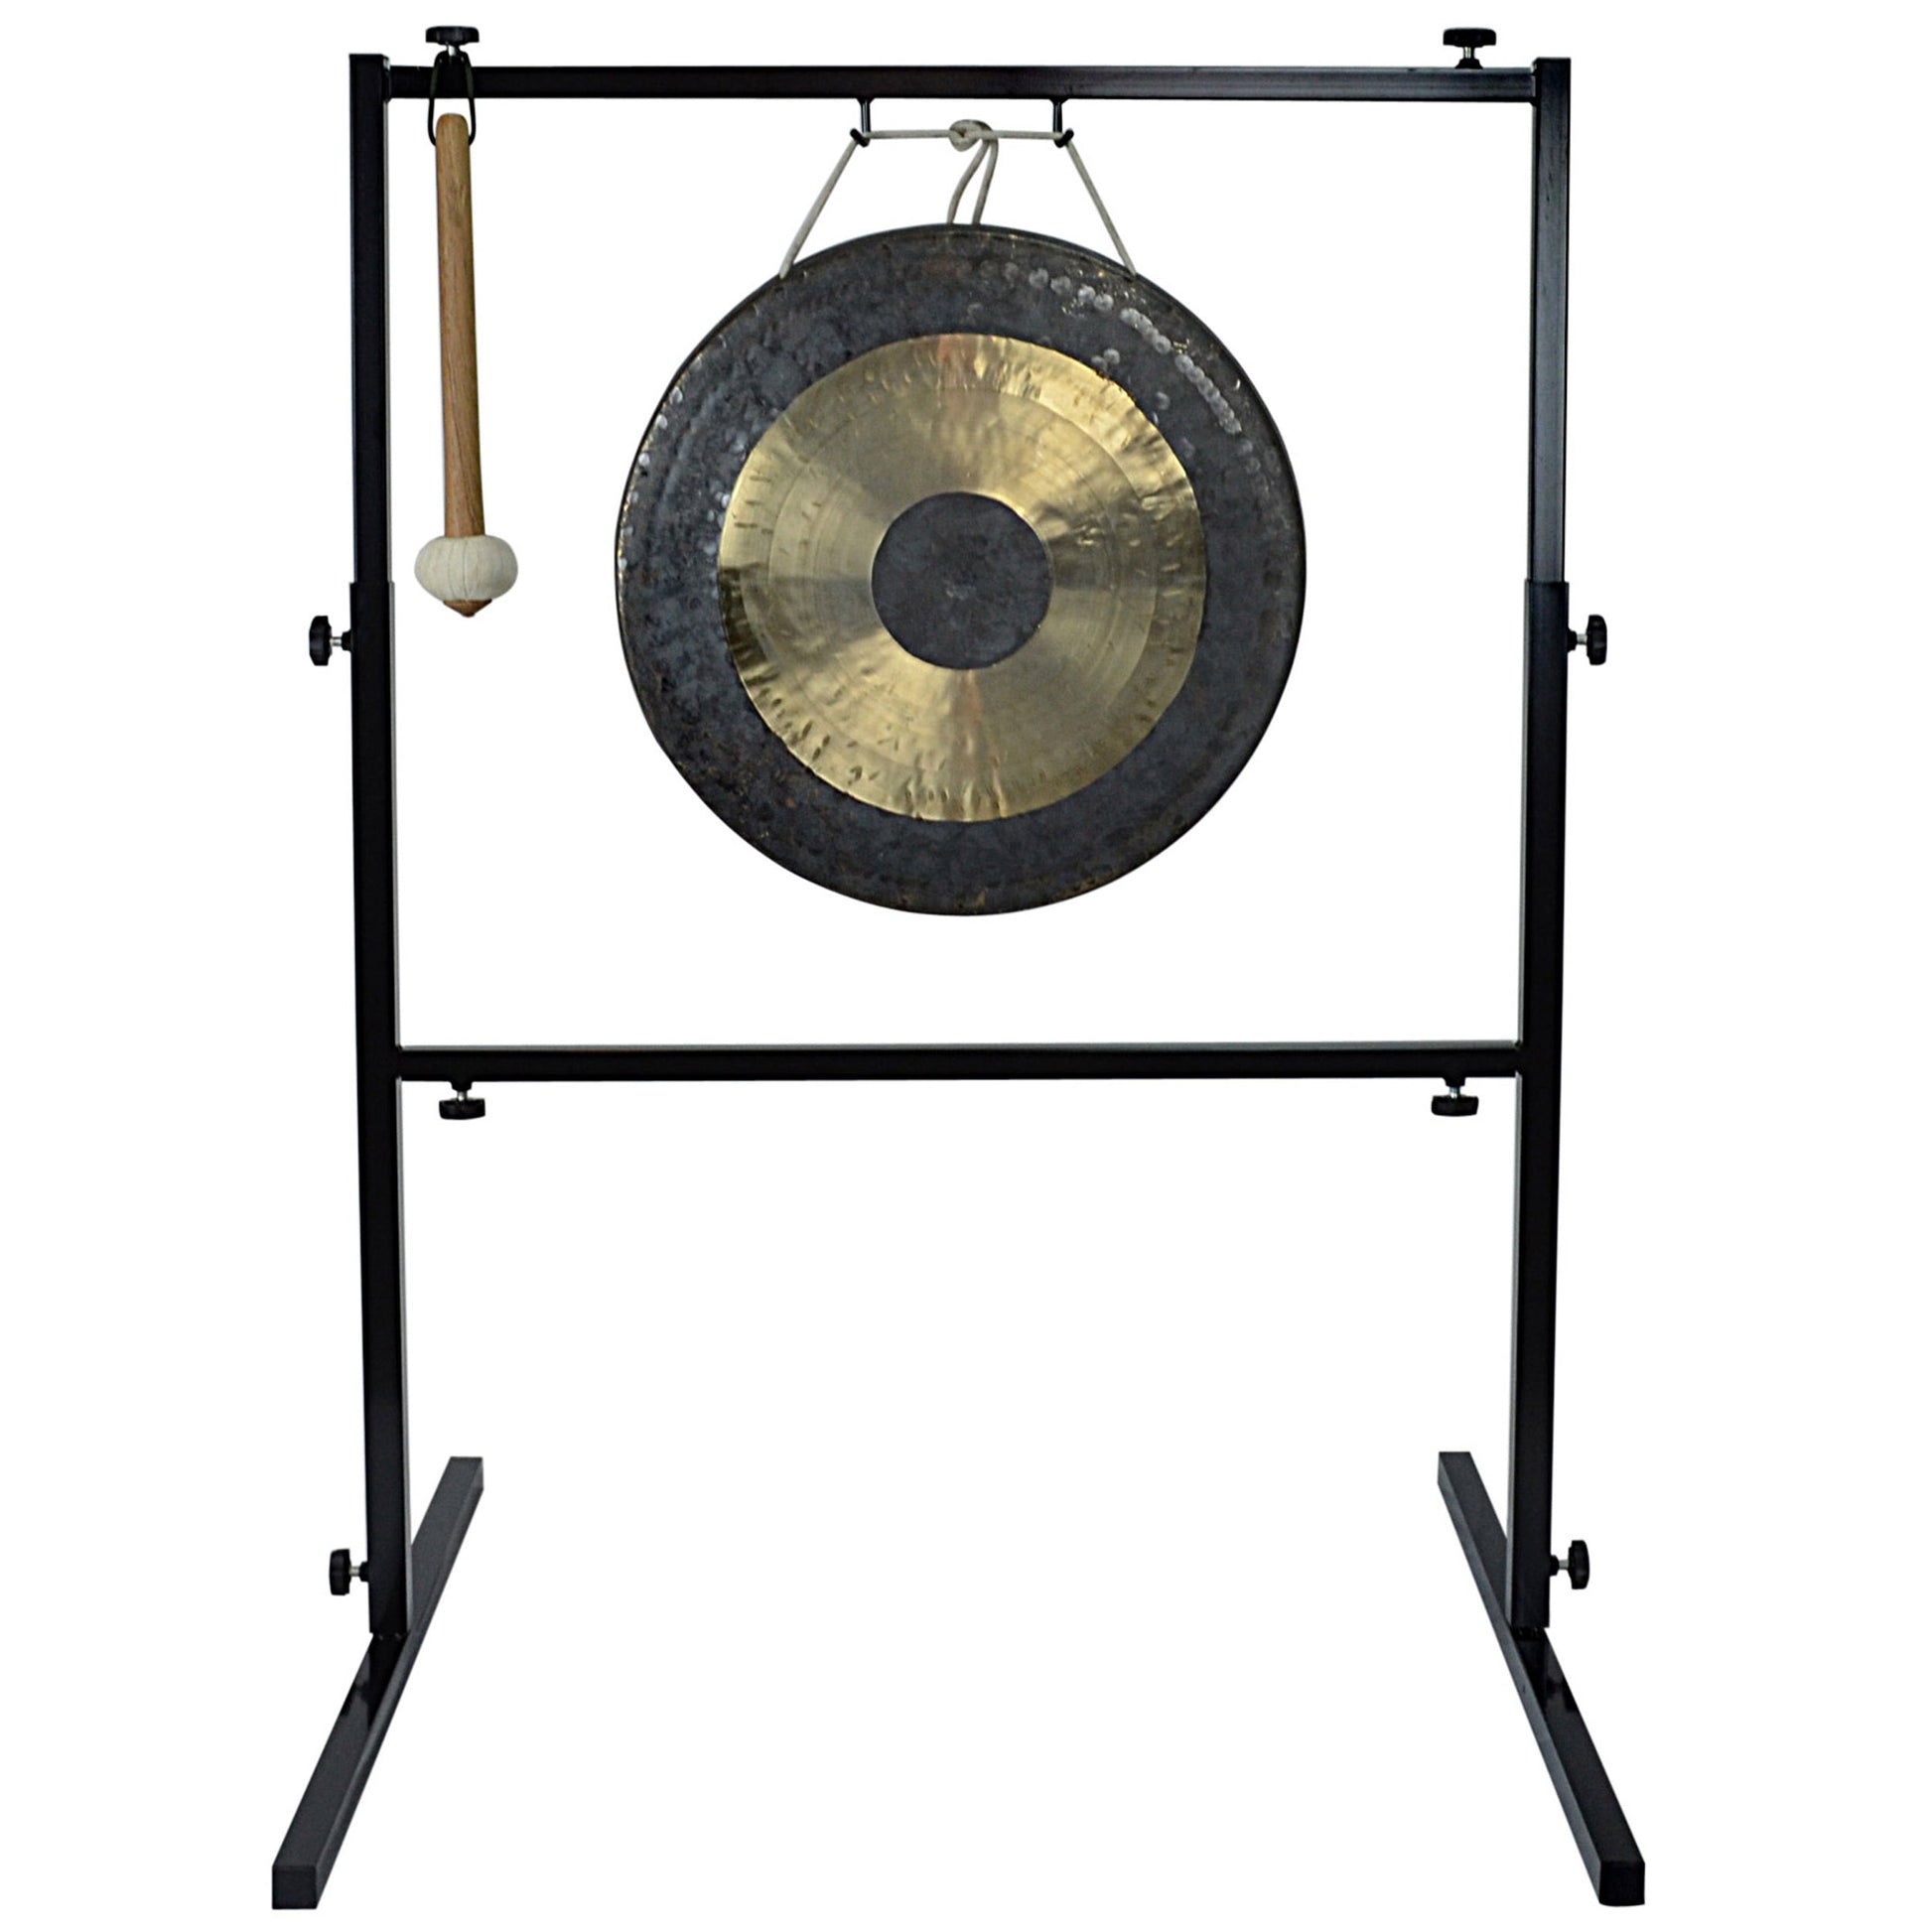 The Gong Shop Featured Products 18" Medium Chau Gongs on Adjustable Metal Gong Stand